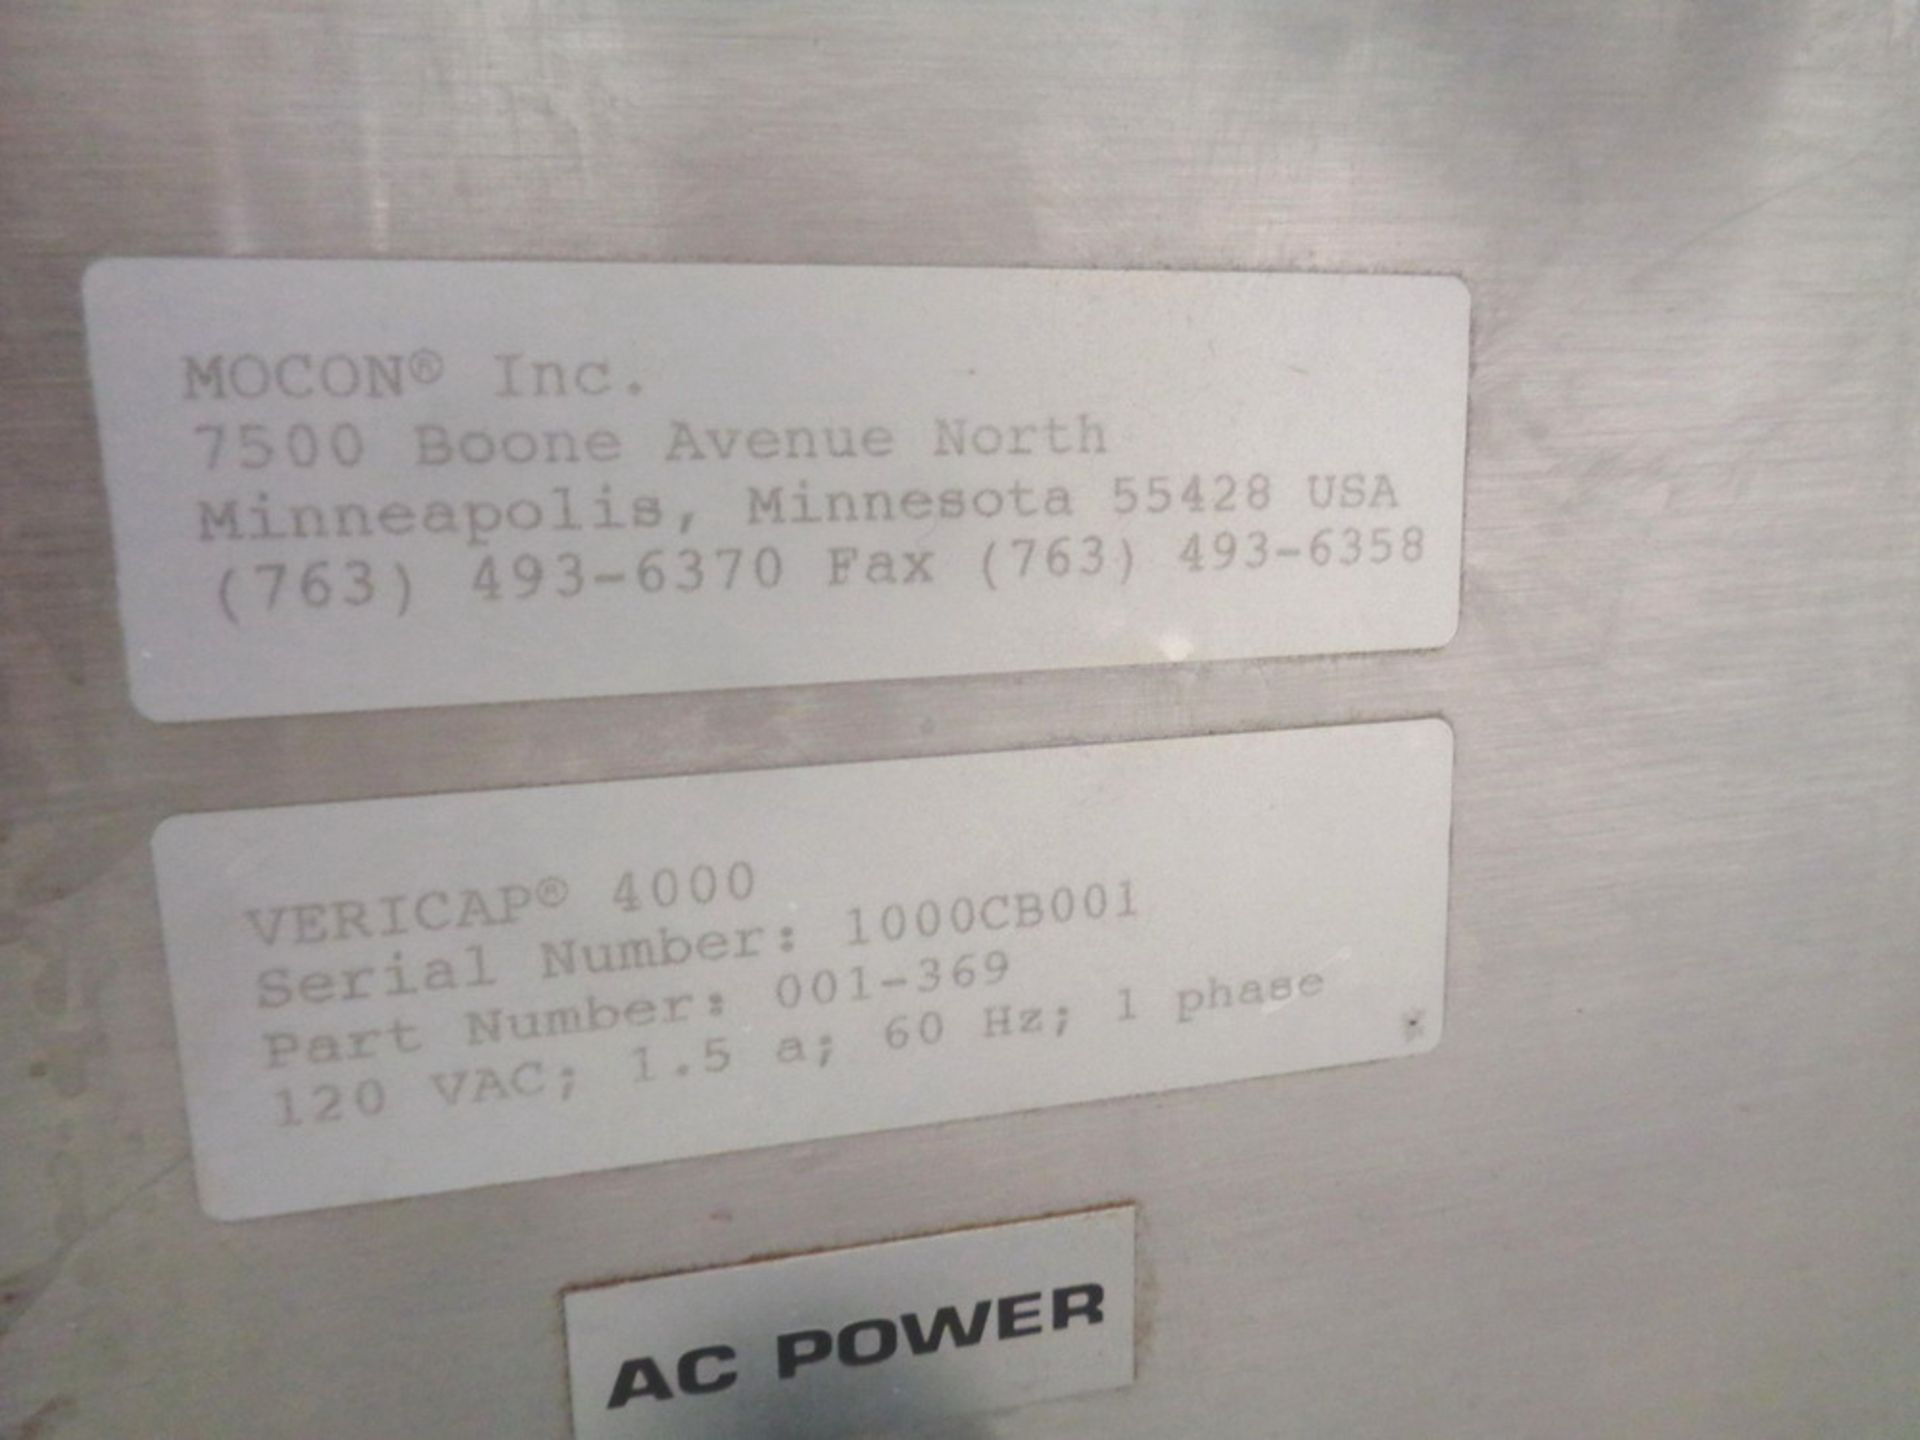 UNUSED Mocon Automatic Vericap Capsule Checkweigher, Model 4000 - Image 10 of 11